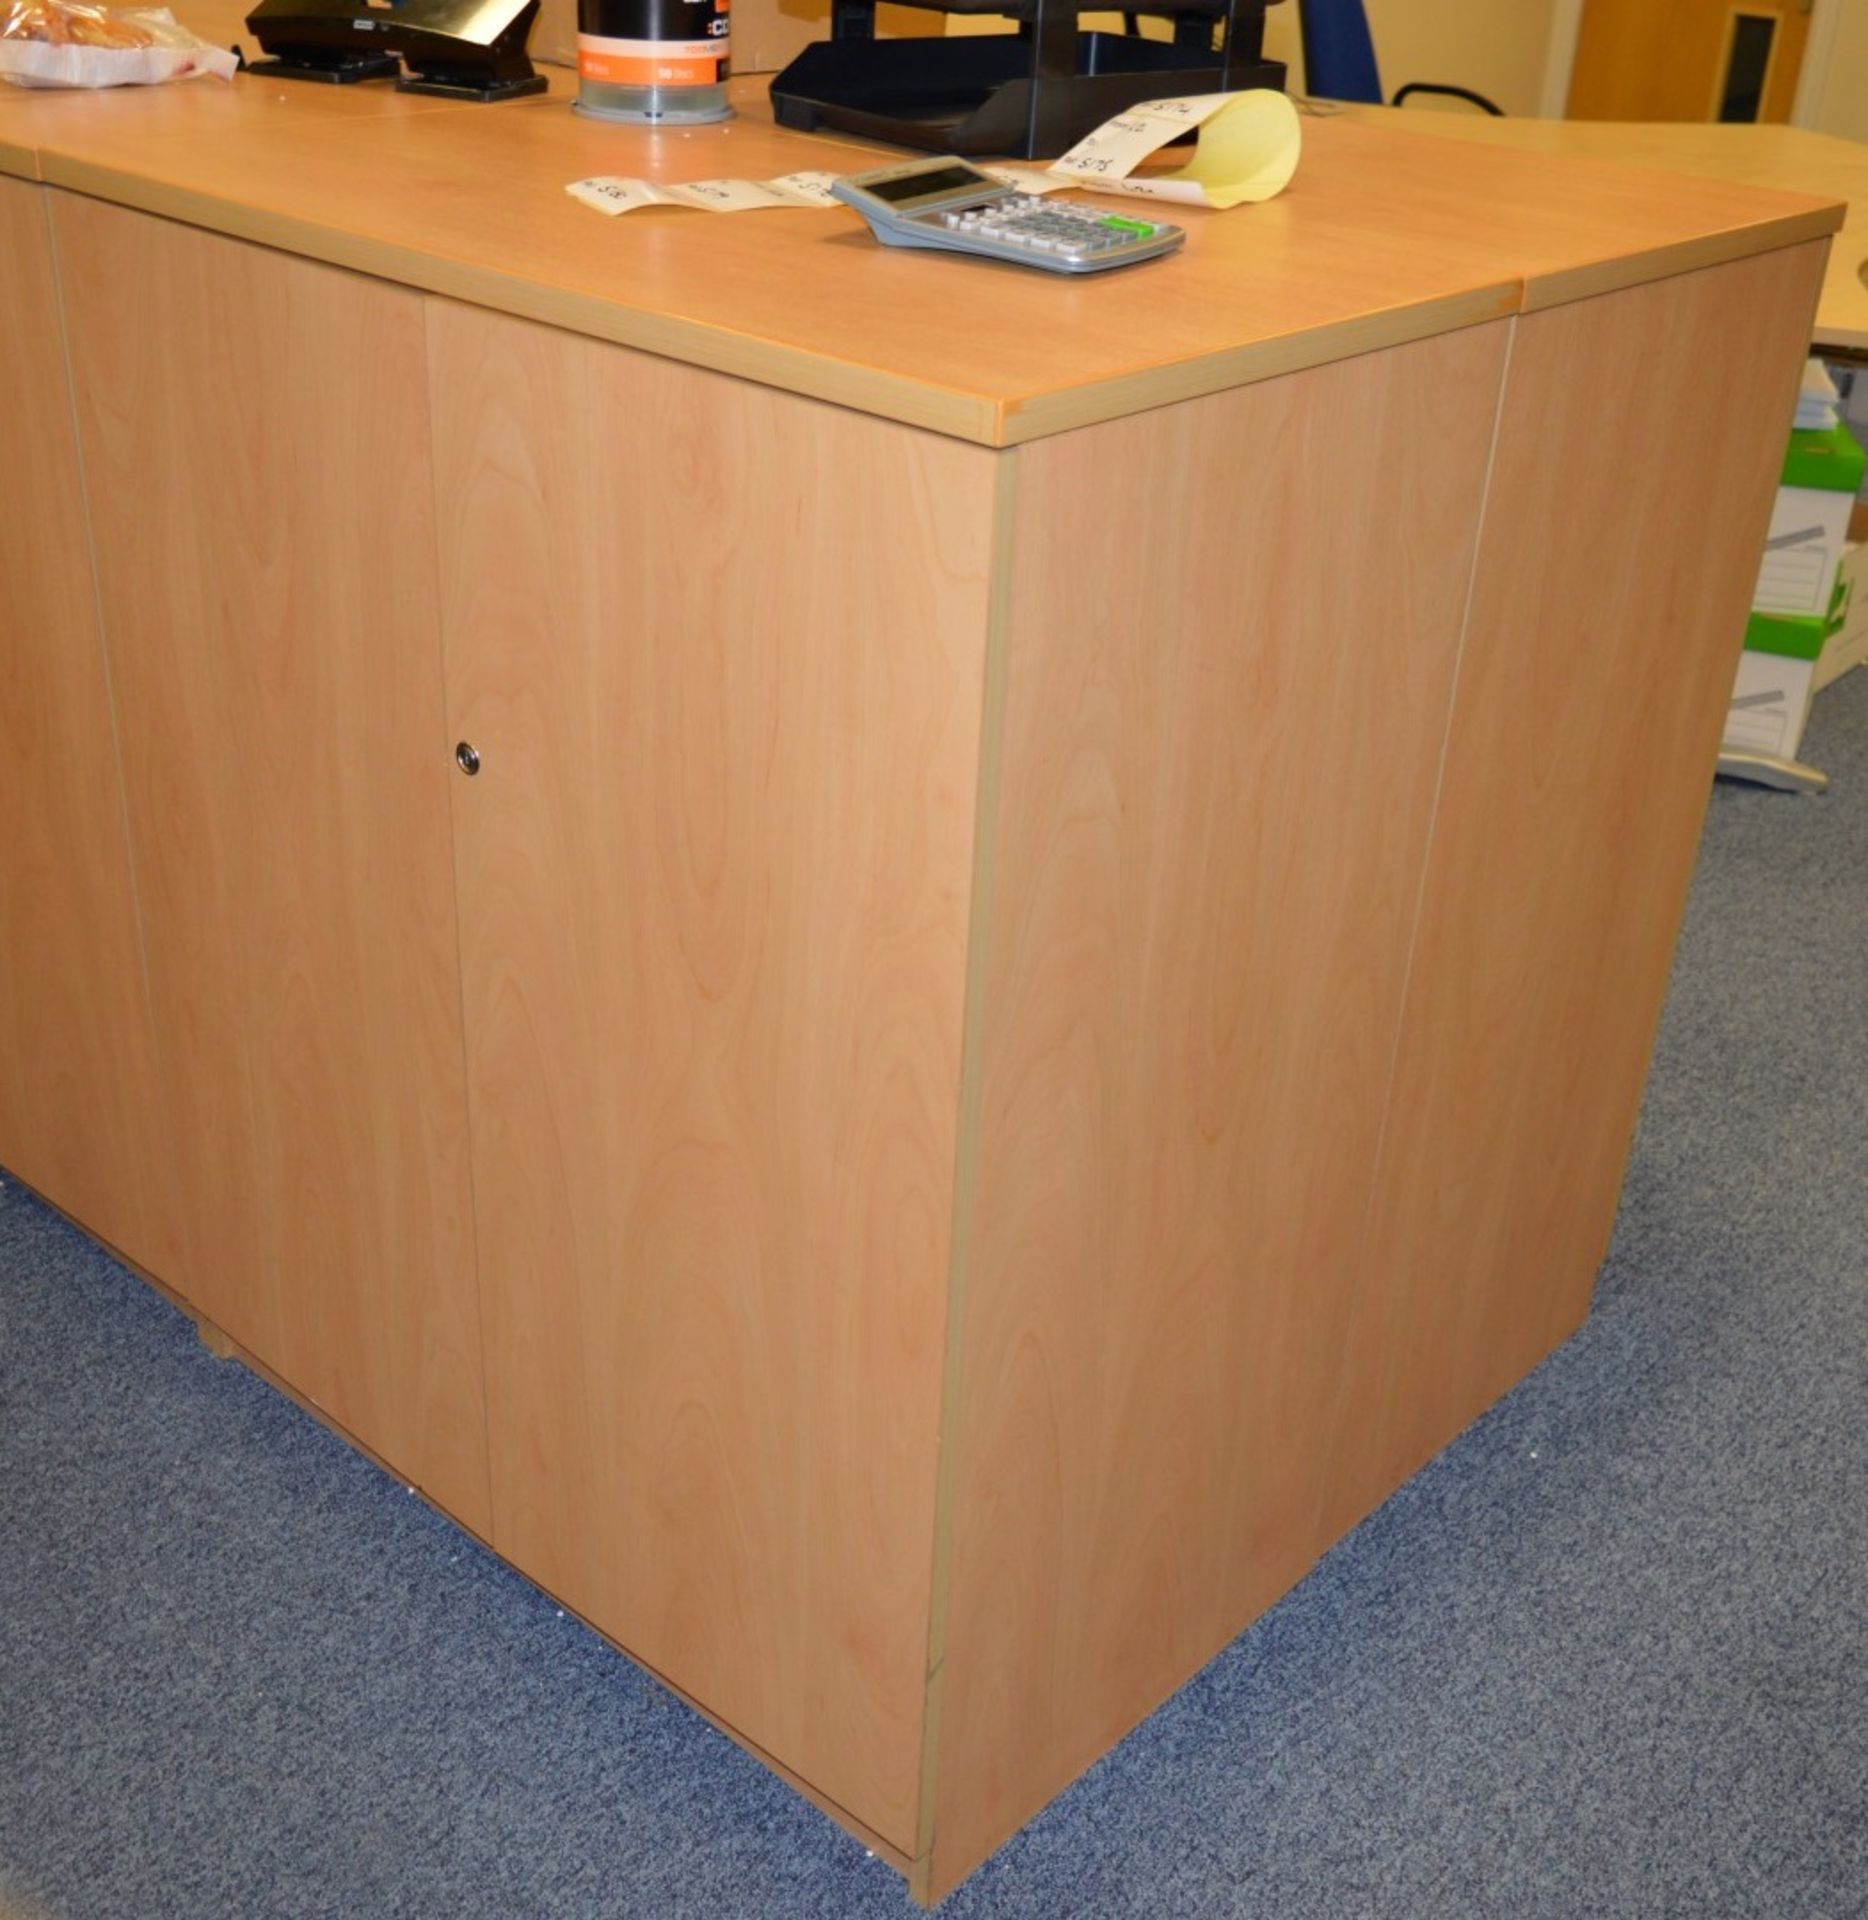 2 x Office Storage Cabinets - Beech Finish - H100 x W93 x D53 cms - Keys Not Included - CL300 - - Image 2 of 3